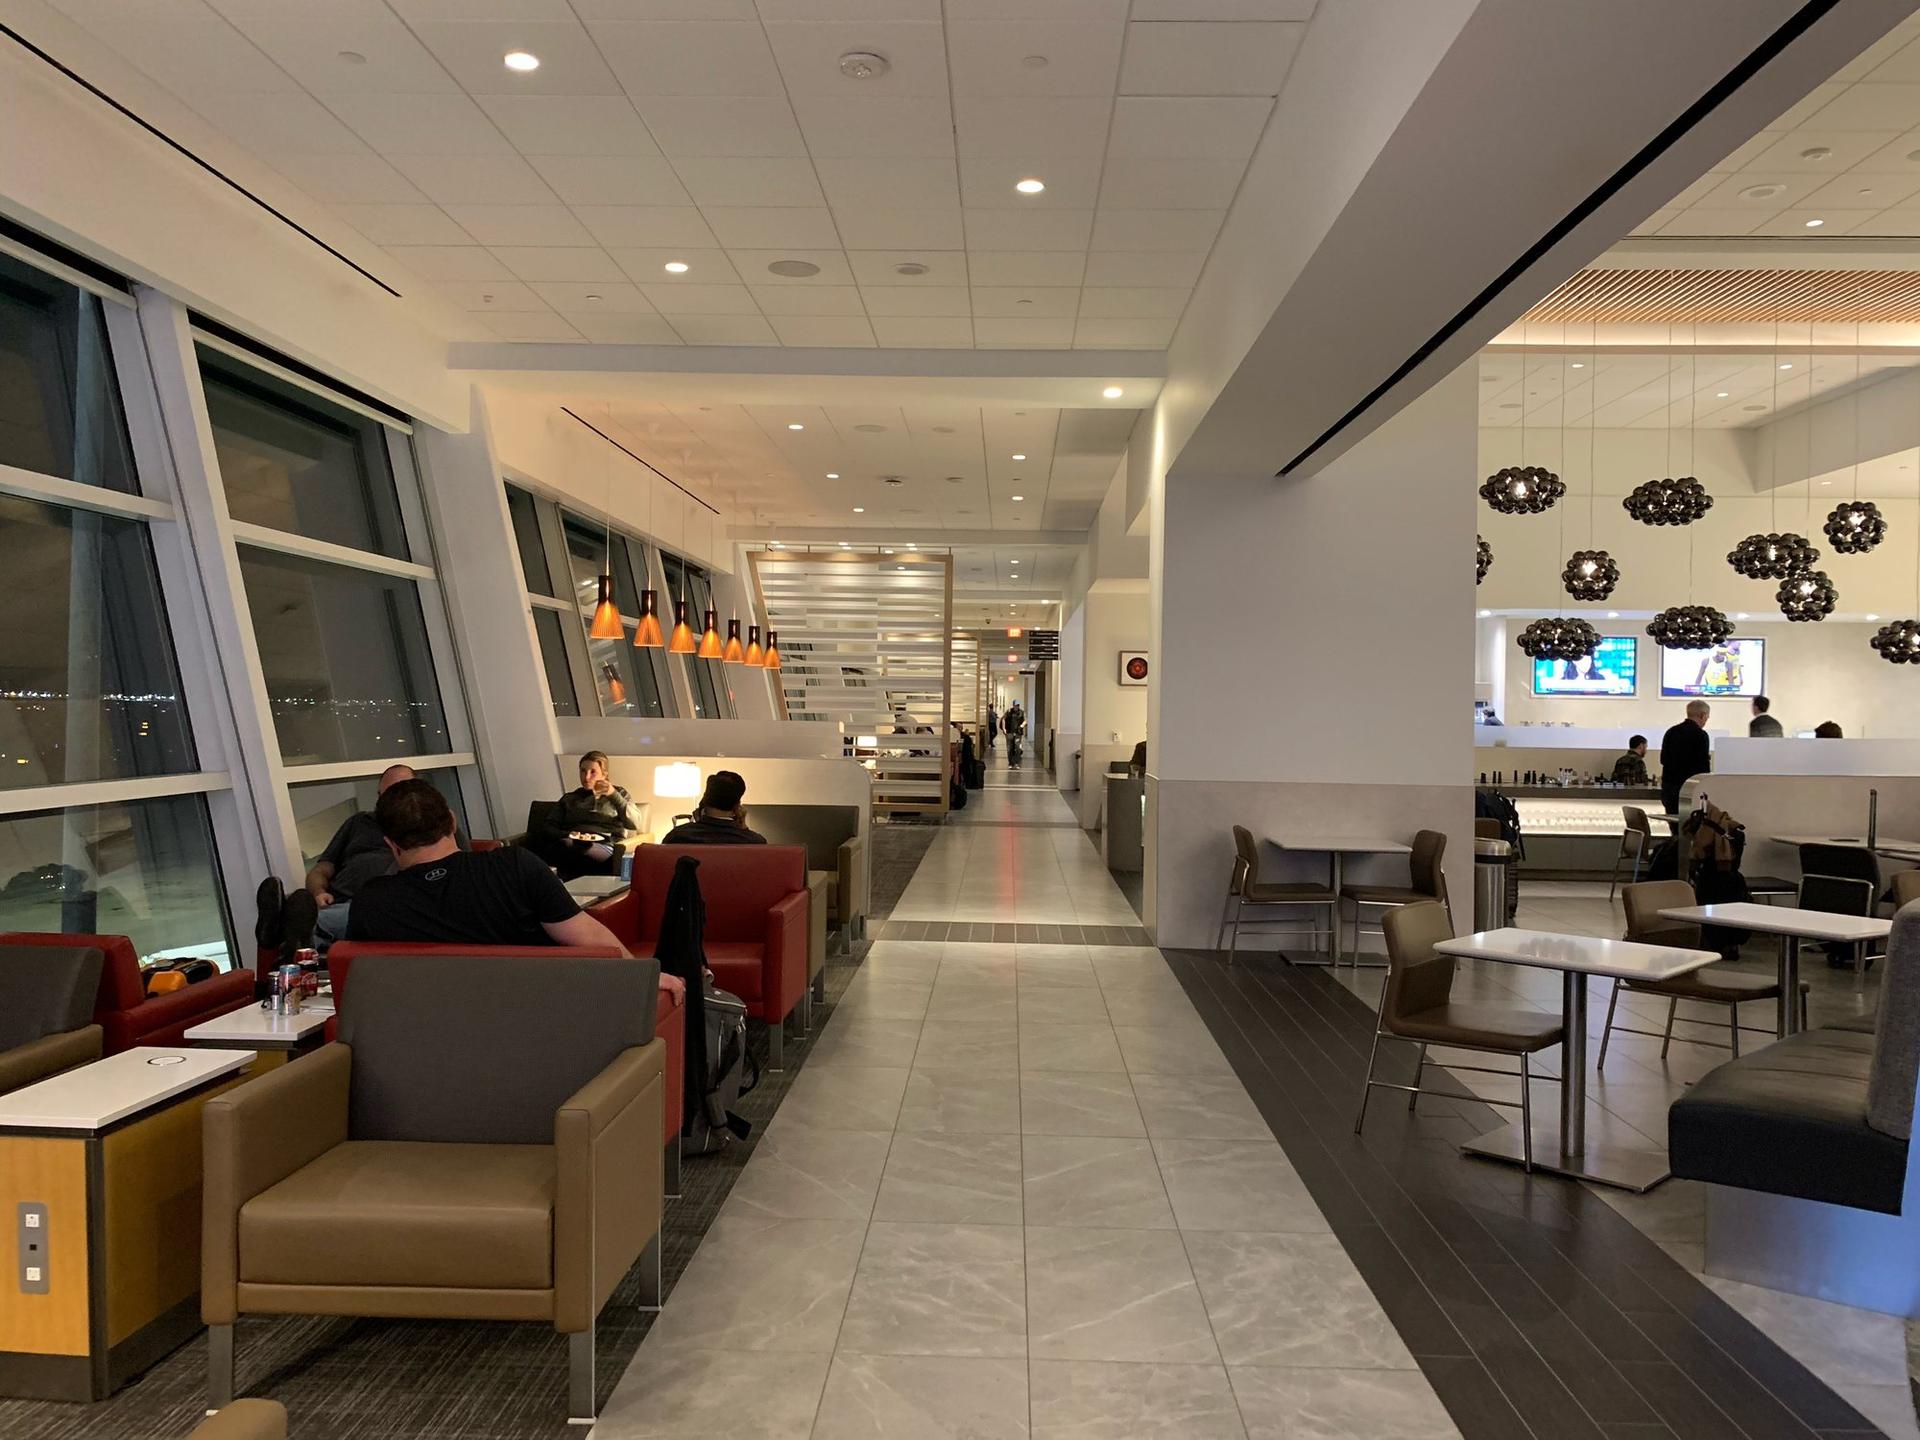 American Airlines Flagship Lounge image 10 of 55